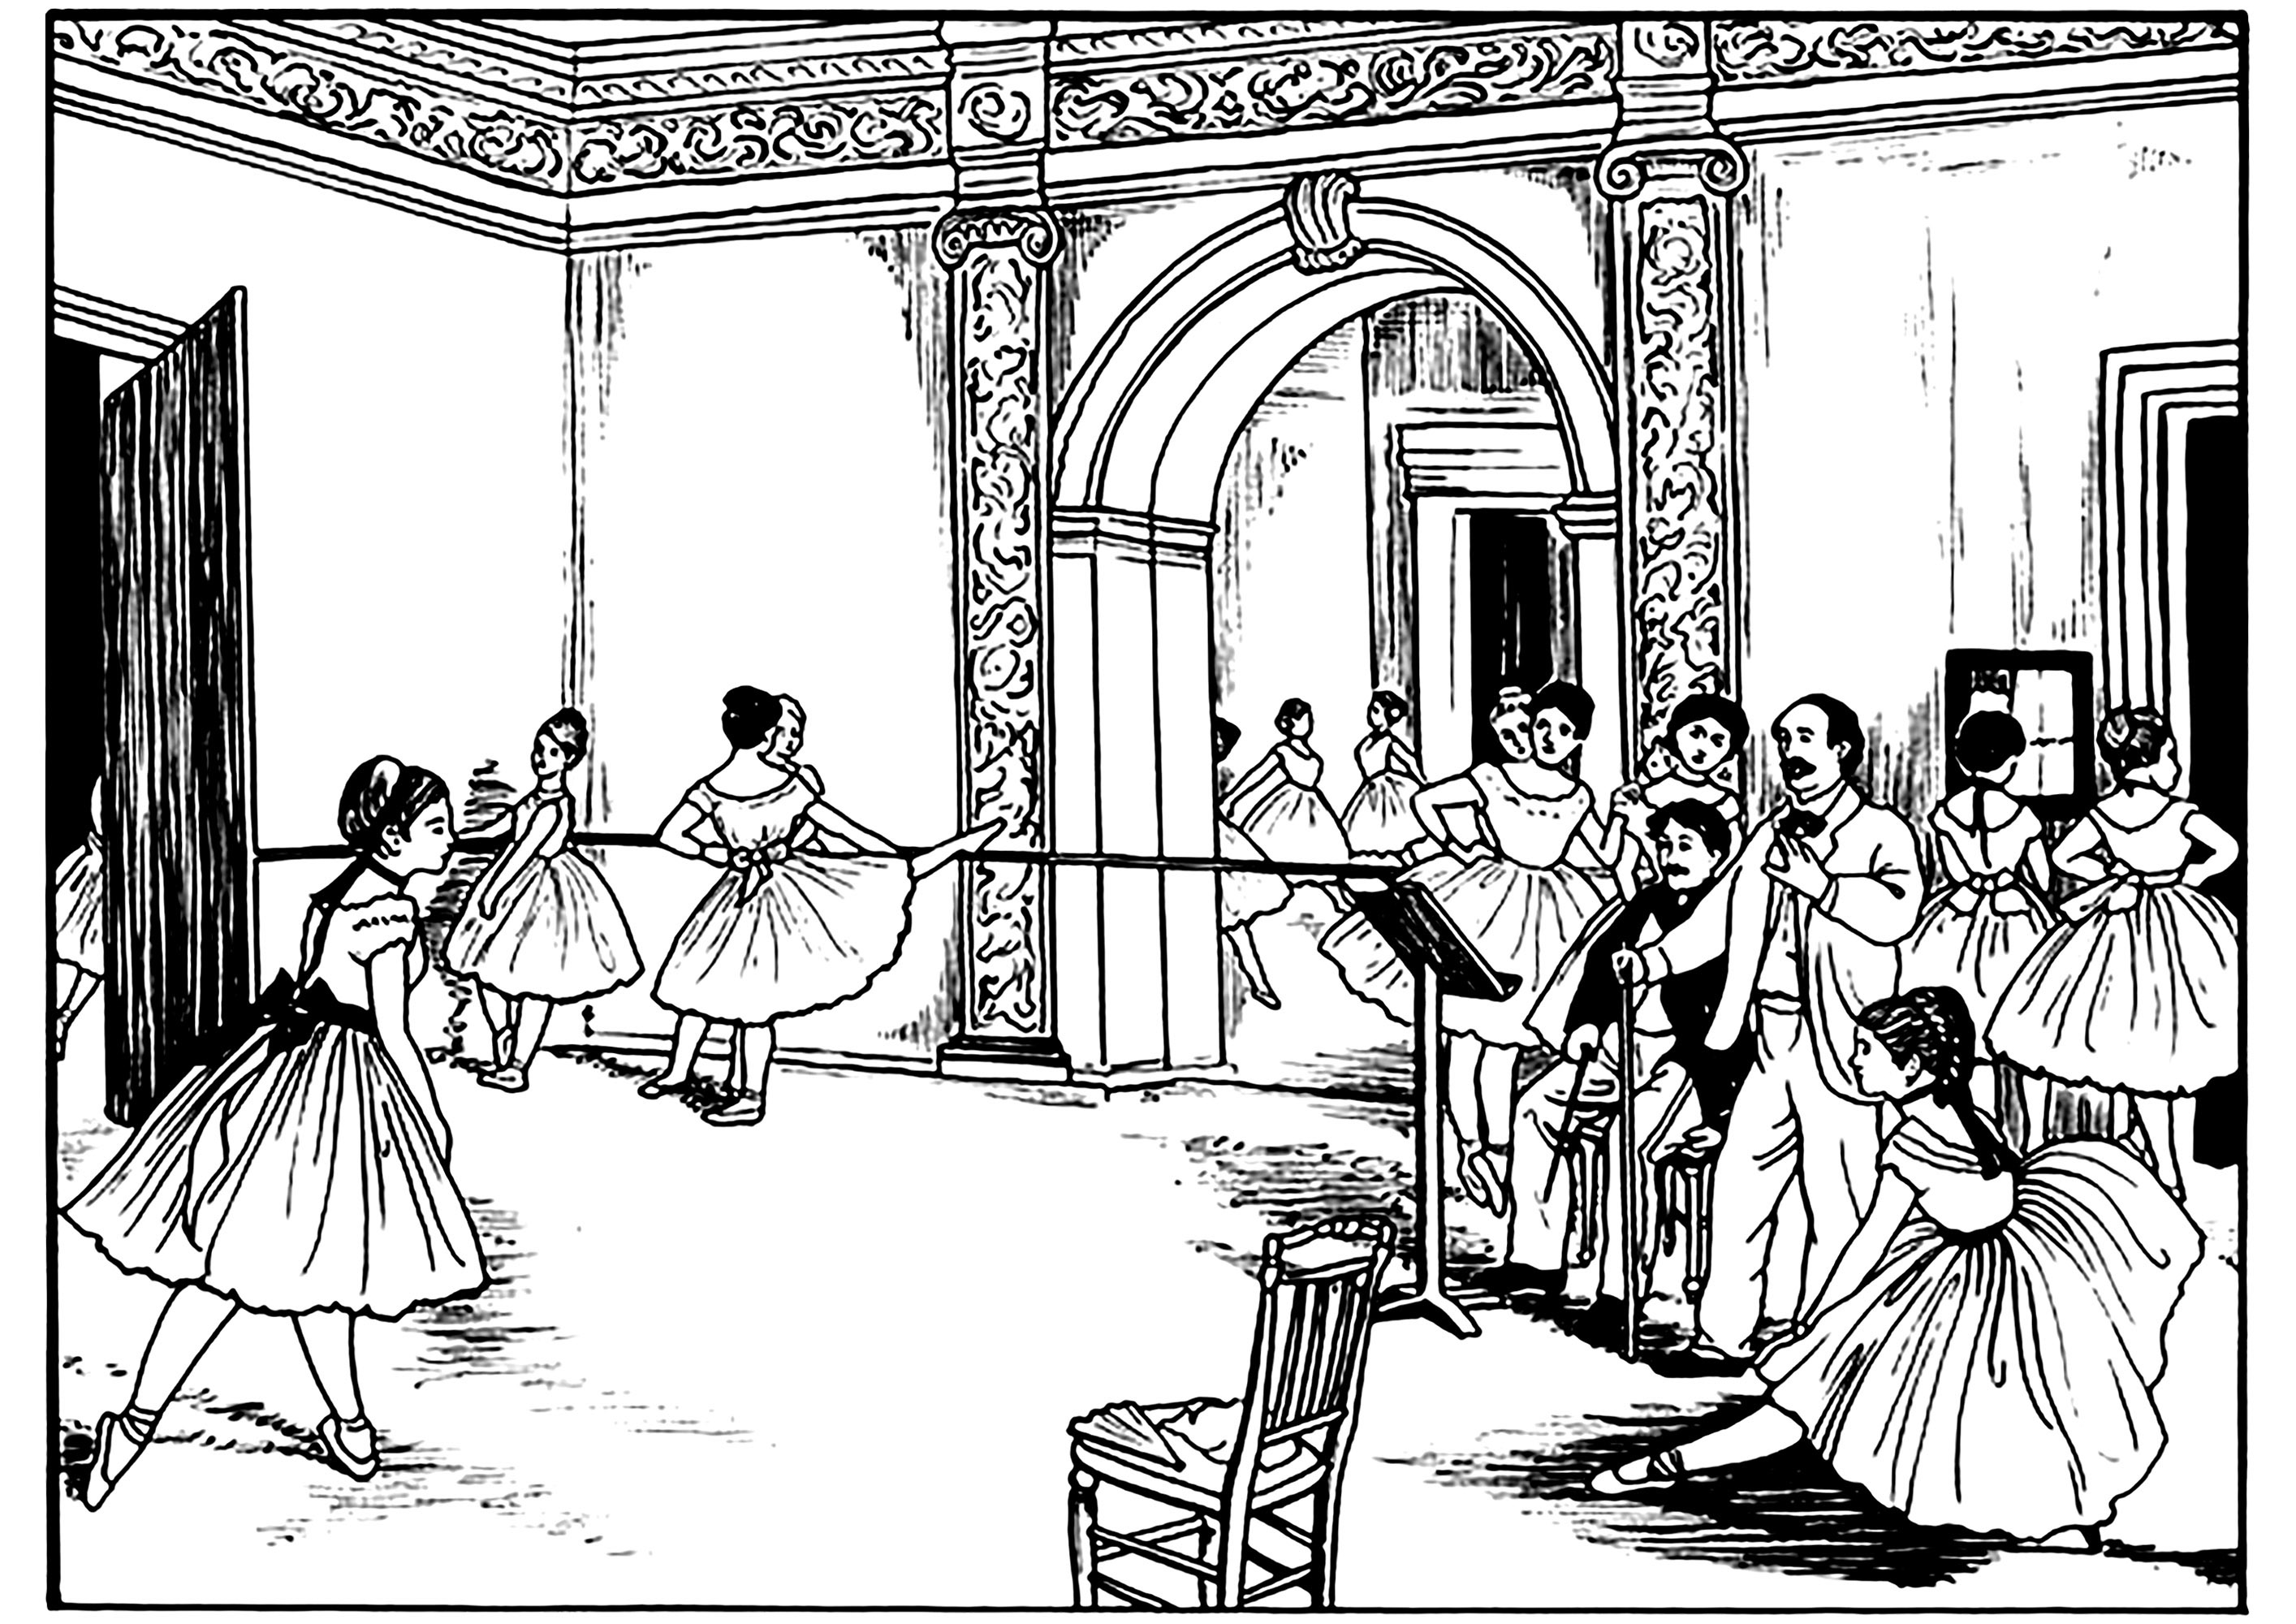 Coloring page created from 'The Dance Foyer at The Opera' by Edgar Degas.  Famous for his dancers, Edgar Degas (1834–1917), real name Hilaire Germain Edgar de Gas, is often considered one of the masters of Impressionism. His painting are characterized by an innovative composition combined with a remarkable analysis of movement.